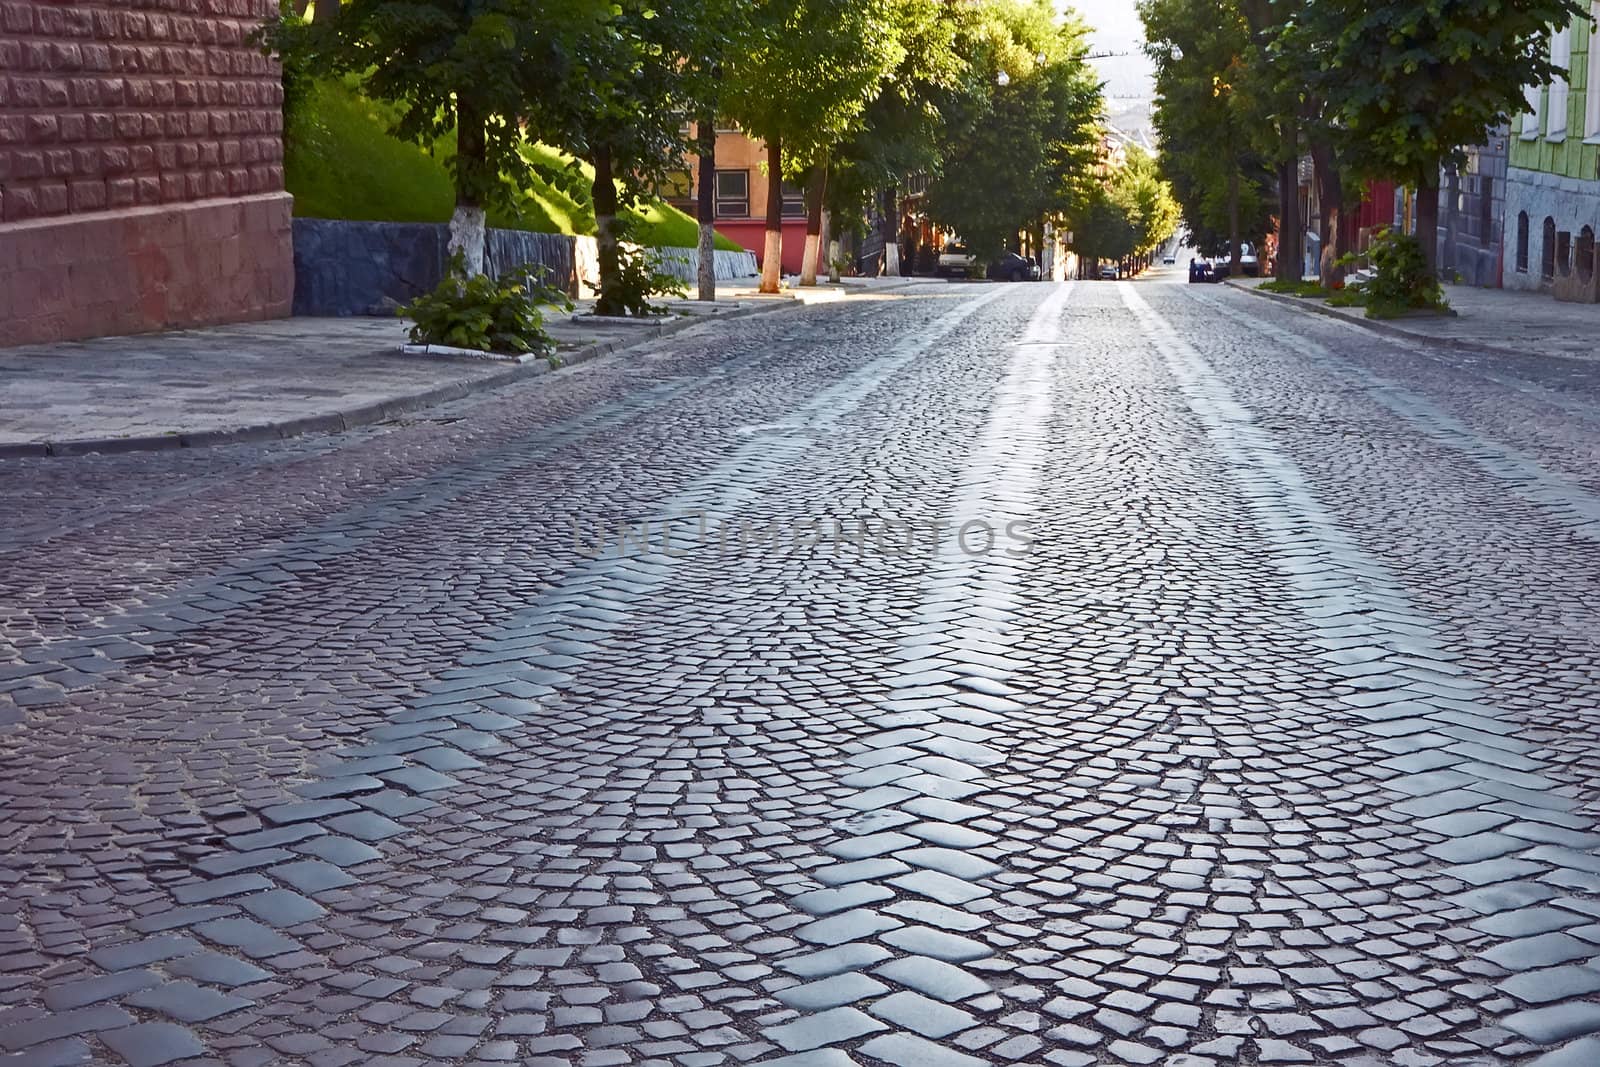 Wide cobbled road by qiiip